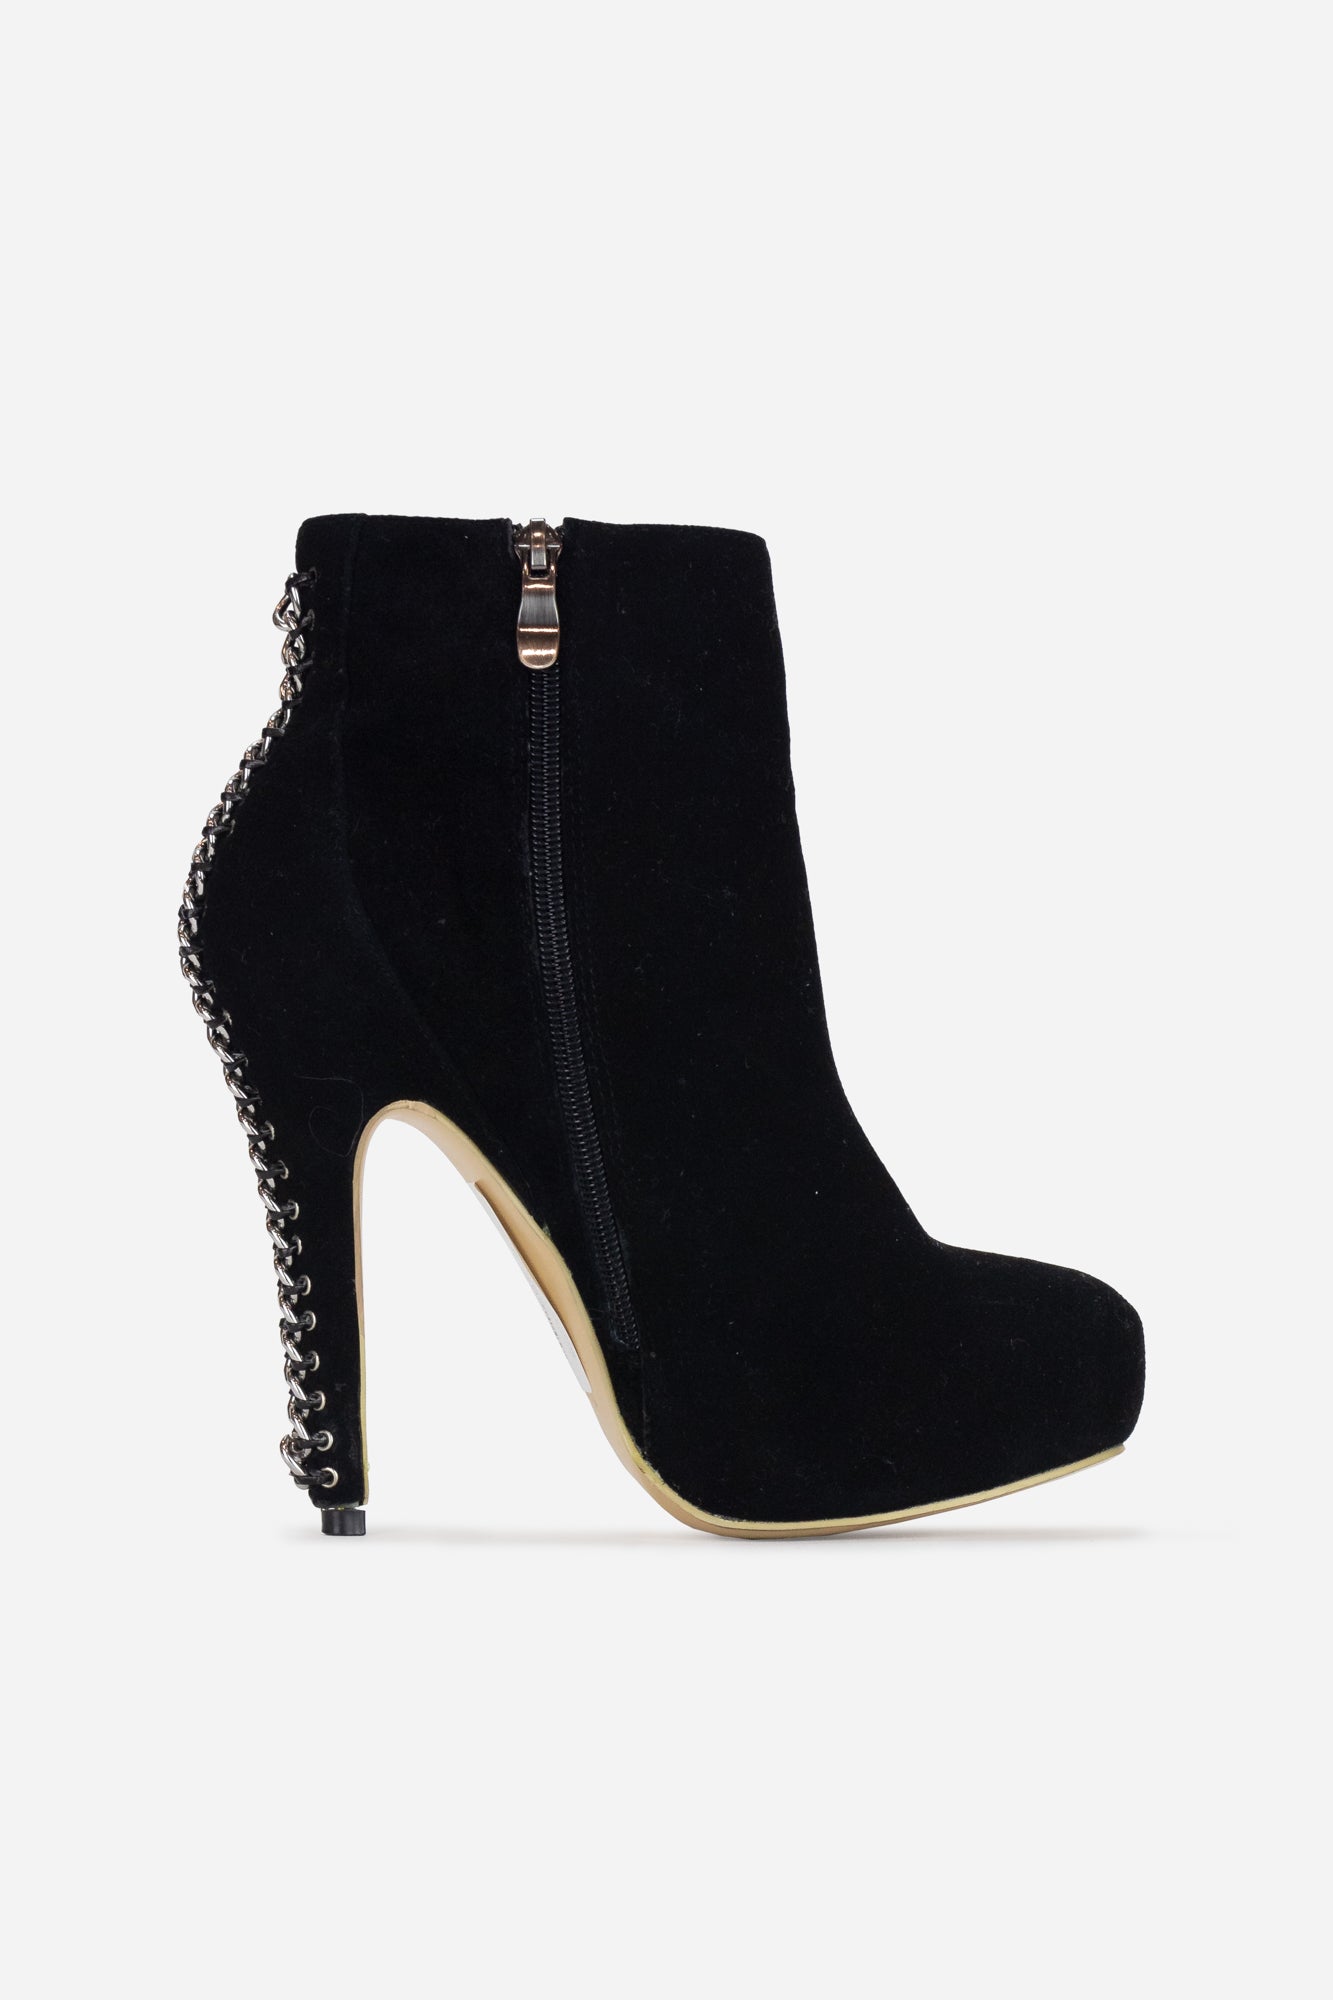 black booties with silver laced heel detail